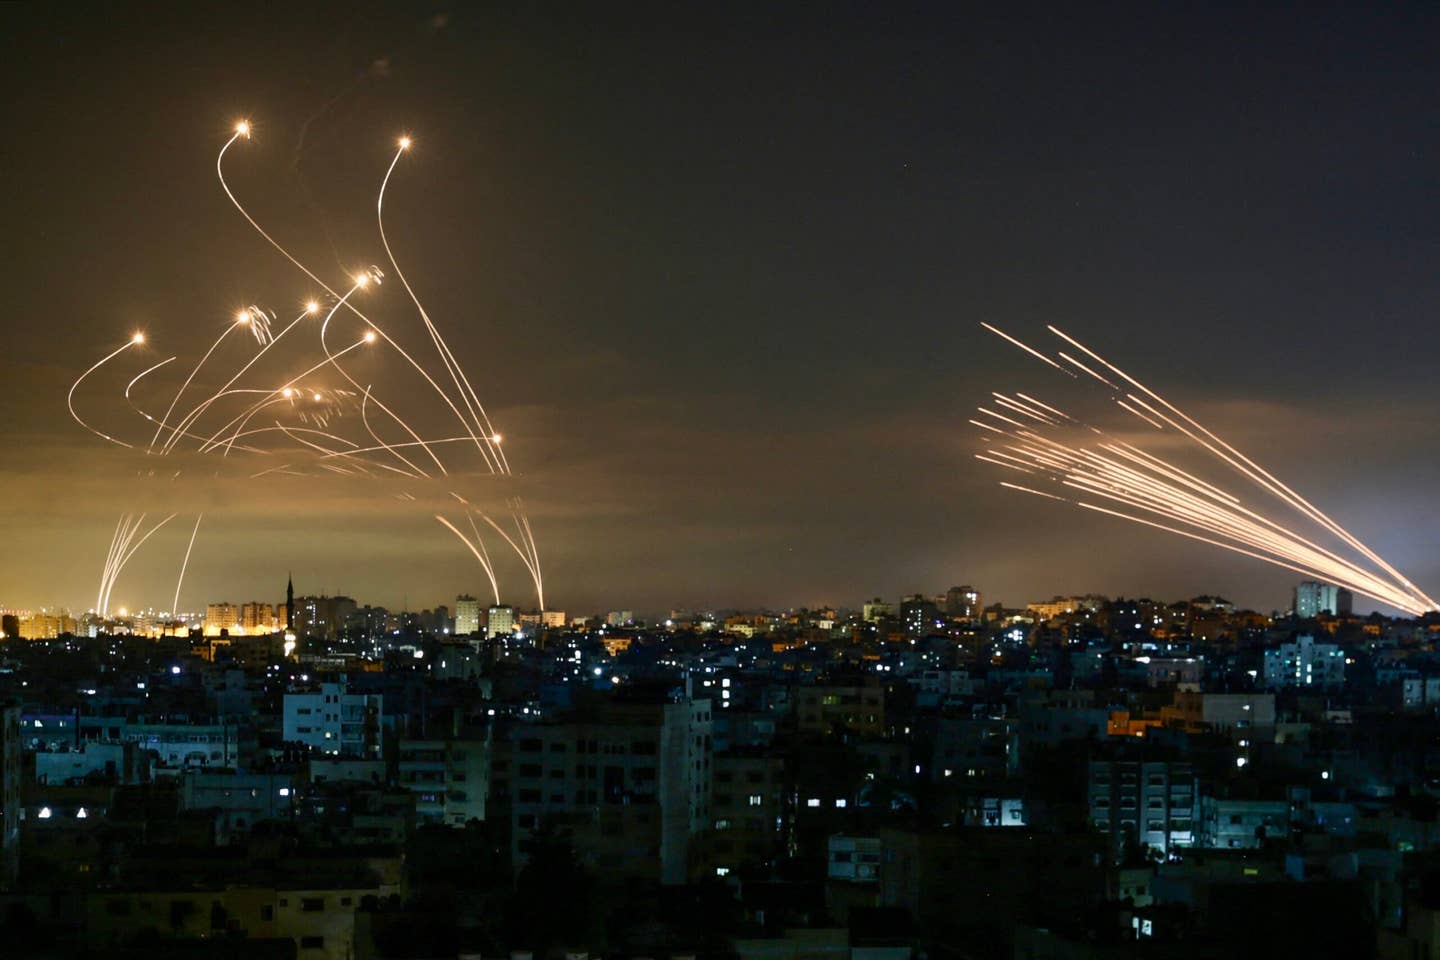 The Israeli Iron Dome missile defense system (L) intercepts rockets (R) fired by the Hamas movement towards southern Israel from Beit Lahia in the northern Gaza Strip as seen in the sky above the Gaza Strip overnight on May 14, 2021. <em>Photo by ANAS BABA/AFP via Getty Images</em>